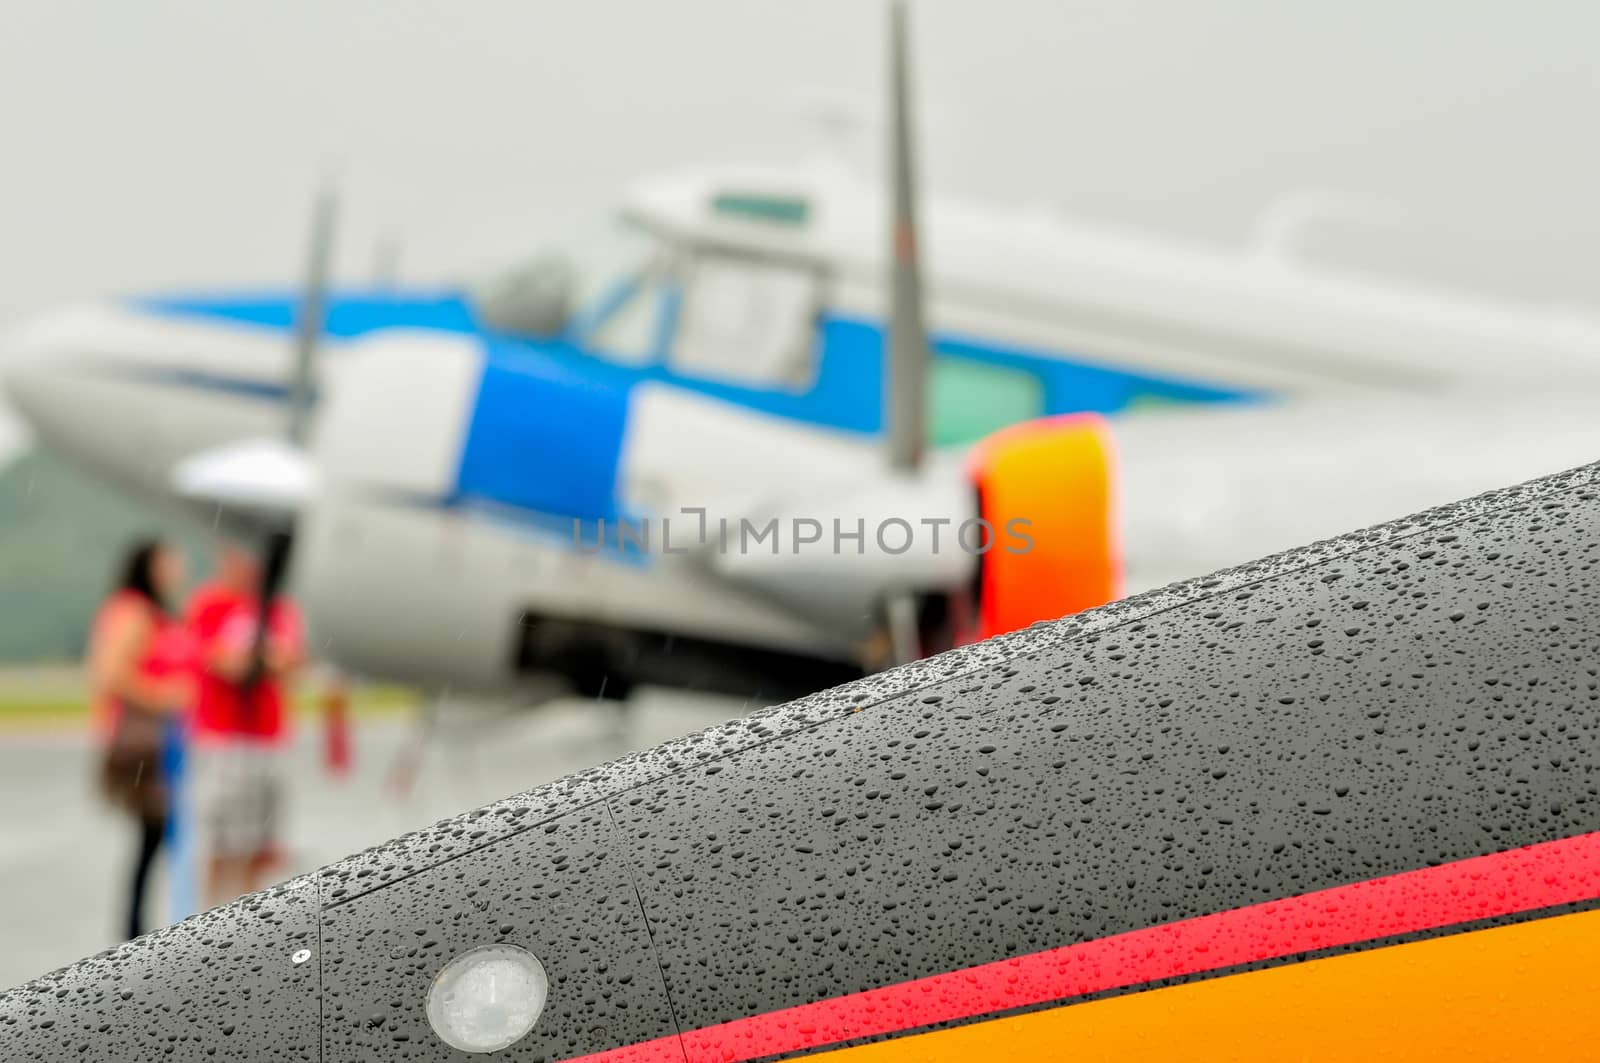 abstract view of airshow during a rain storm by digidreamgrafix